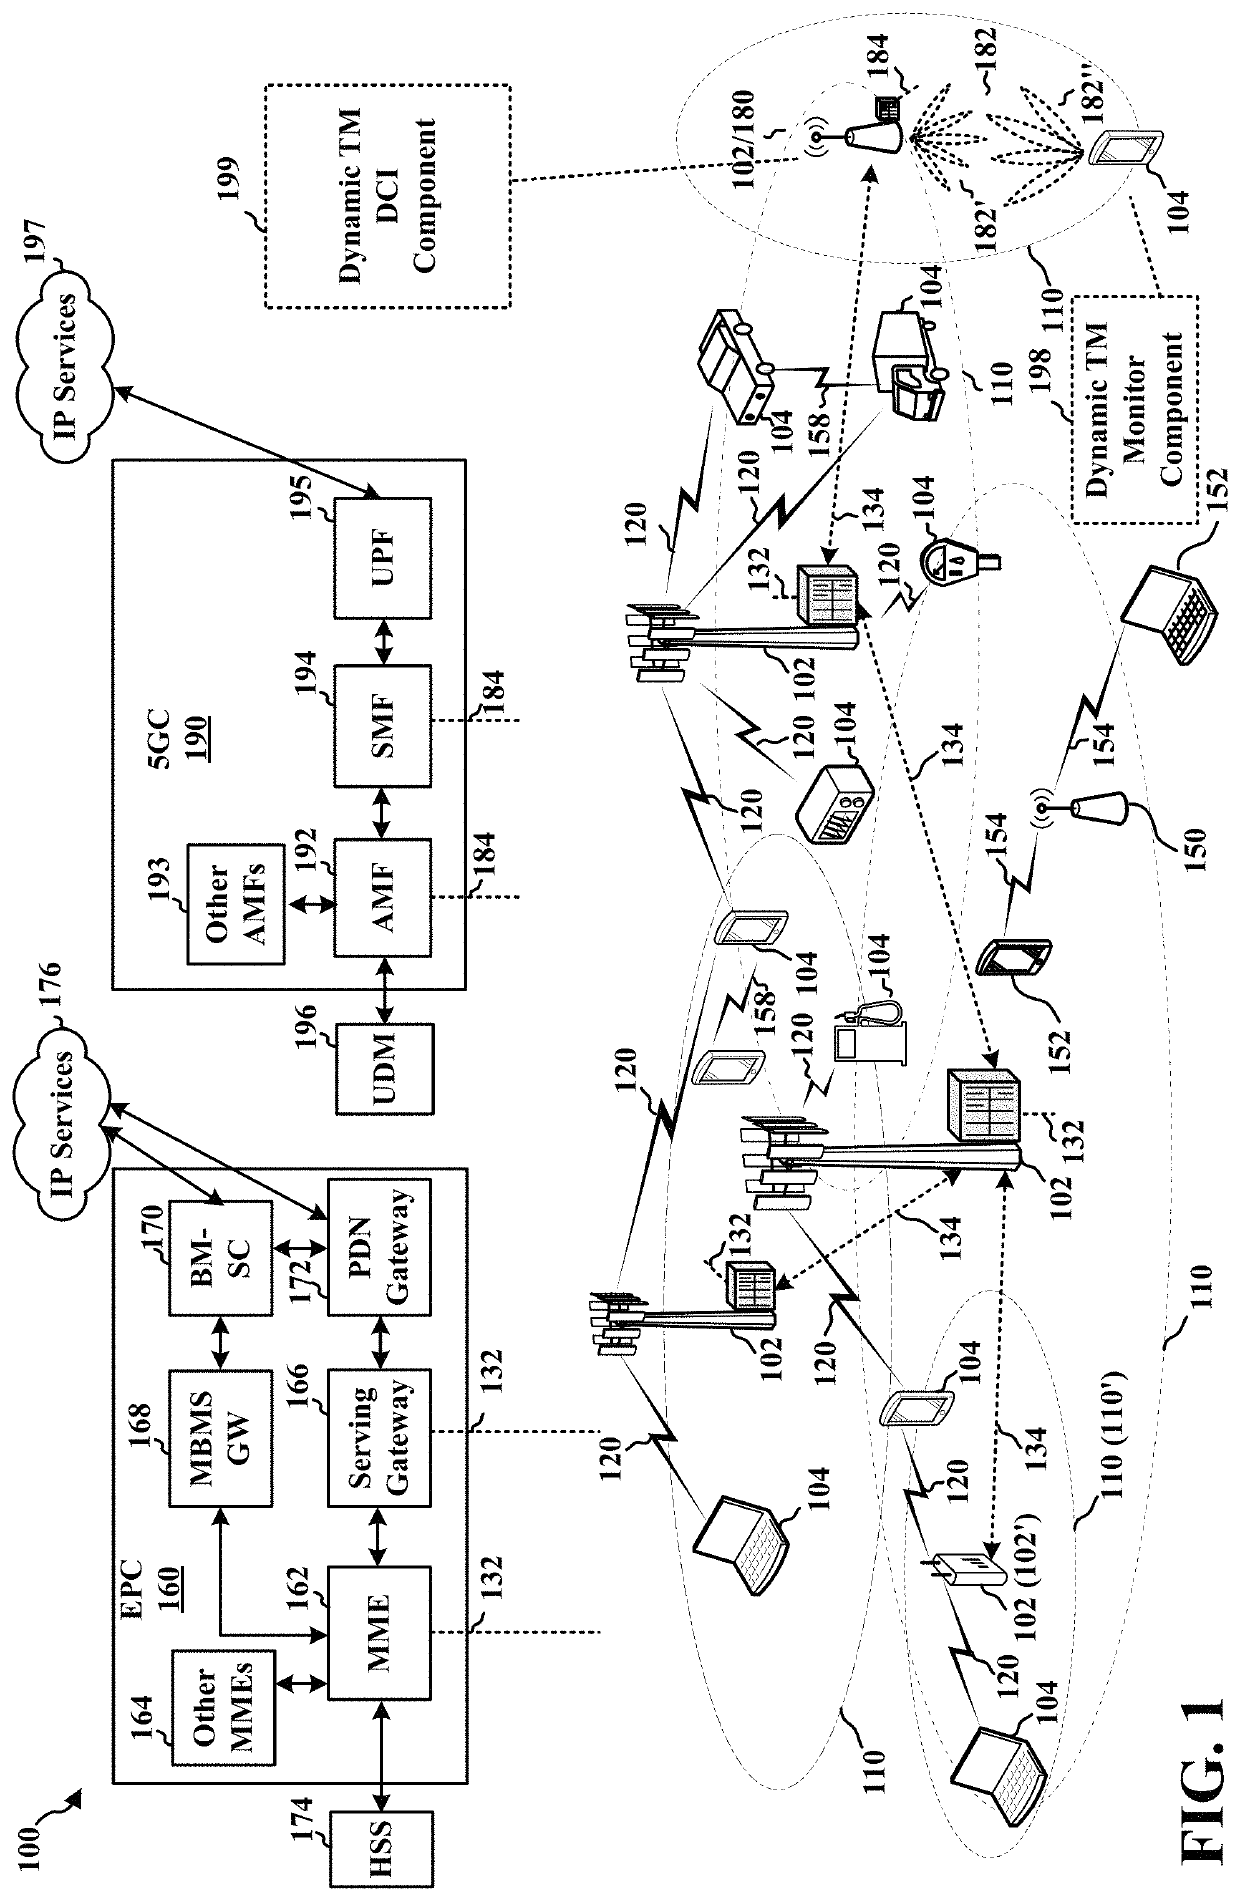 Channel state information measurement and feedback for transmission mode switching